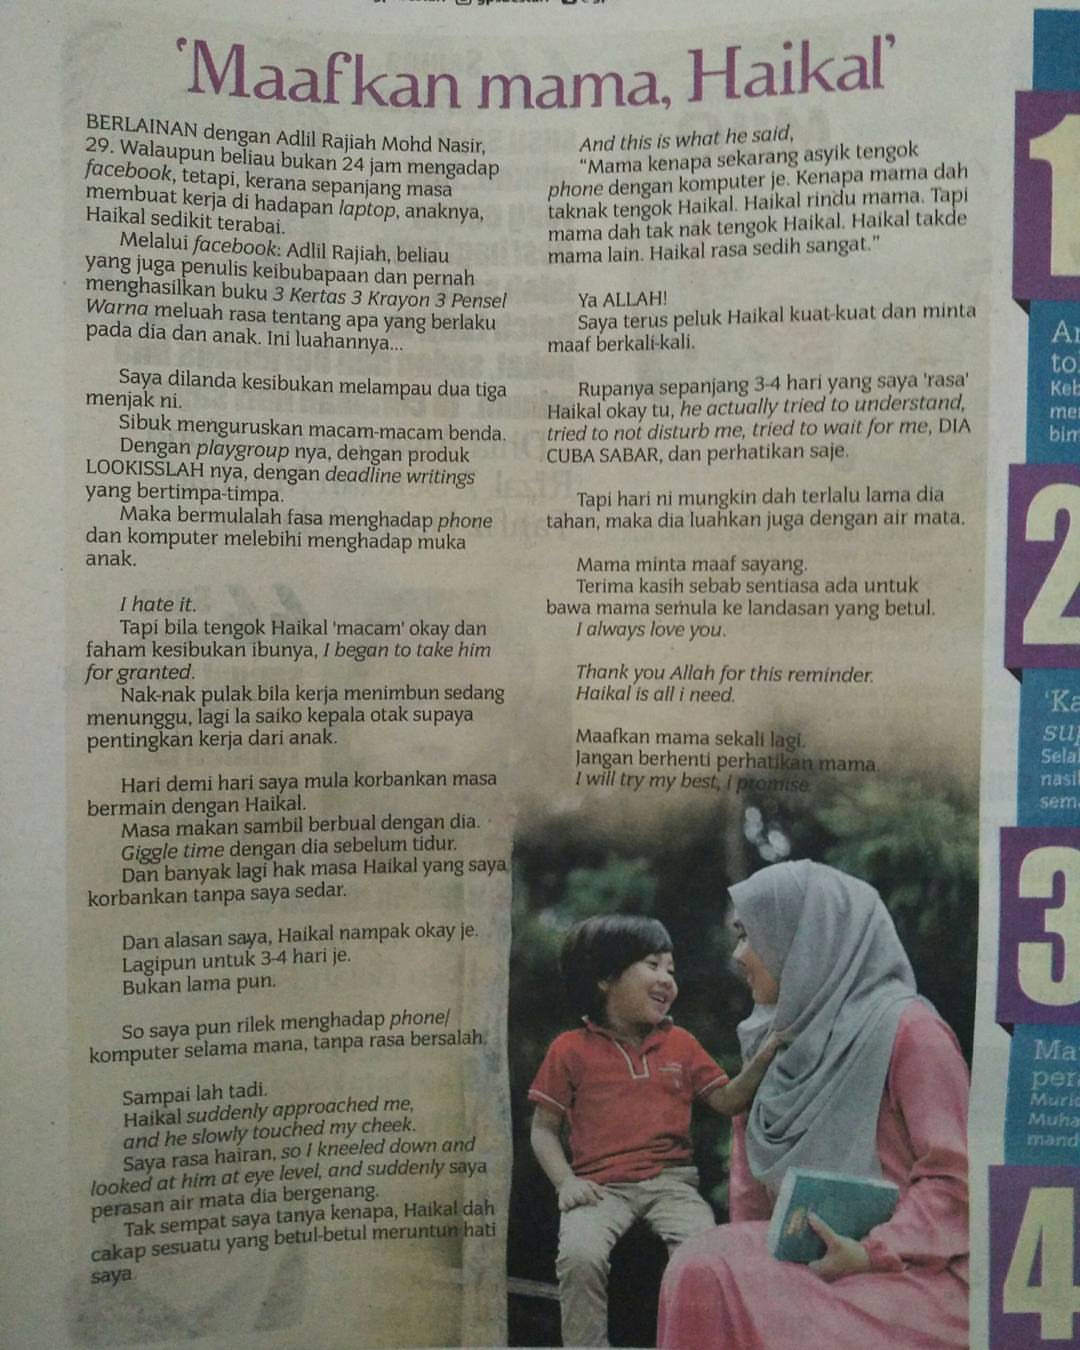 Featured in Sinar Harian